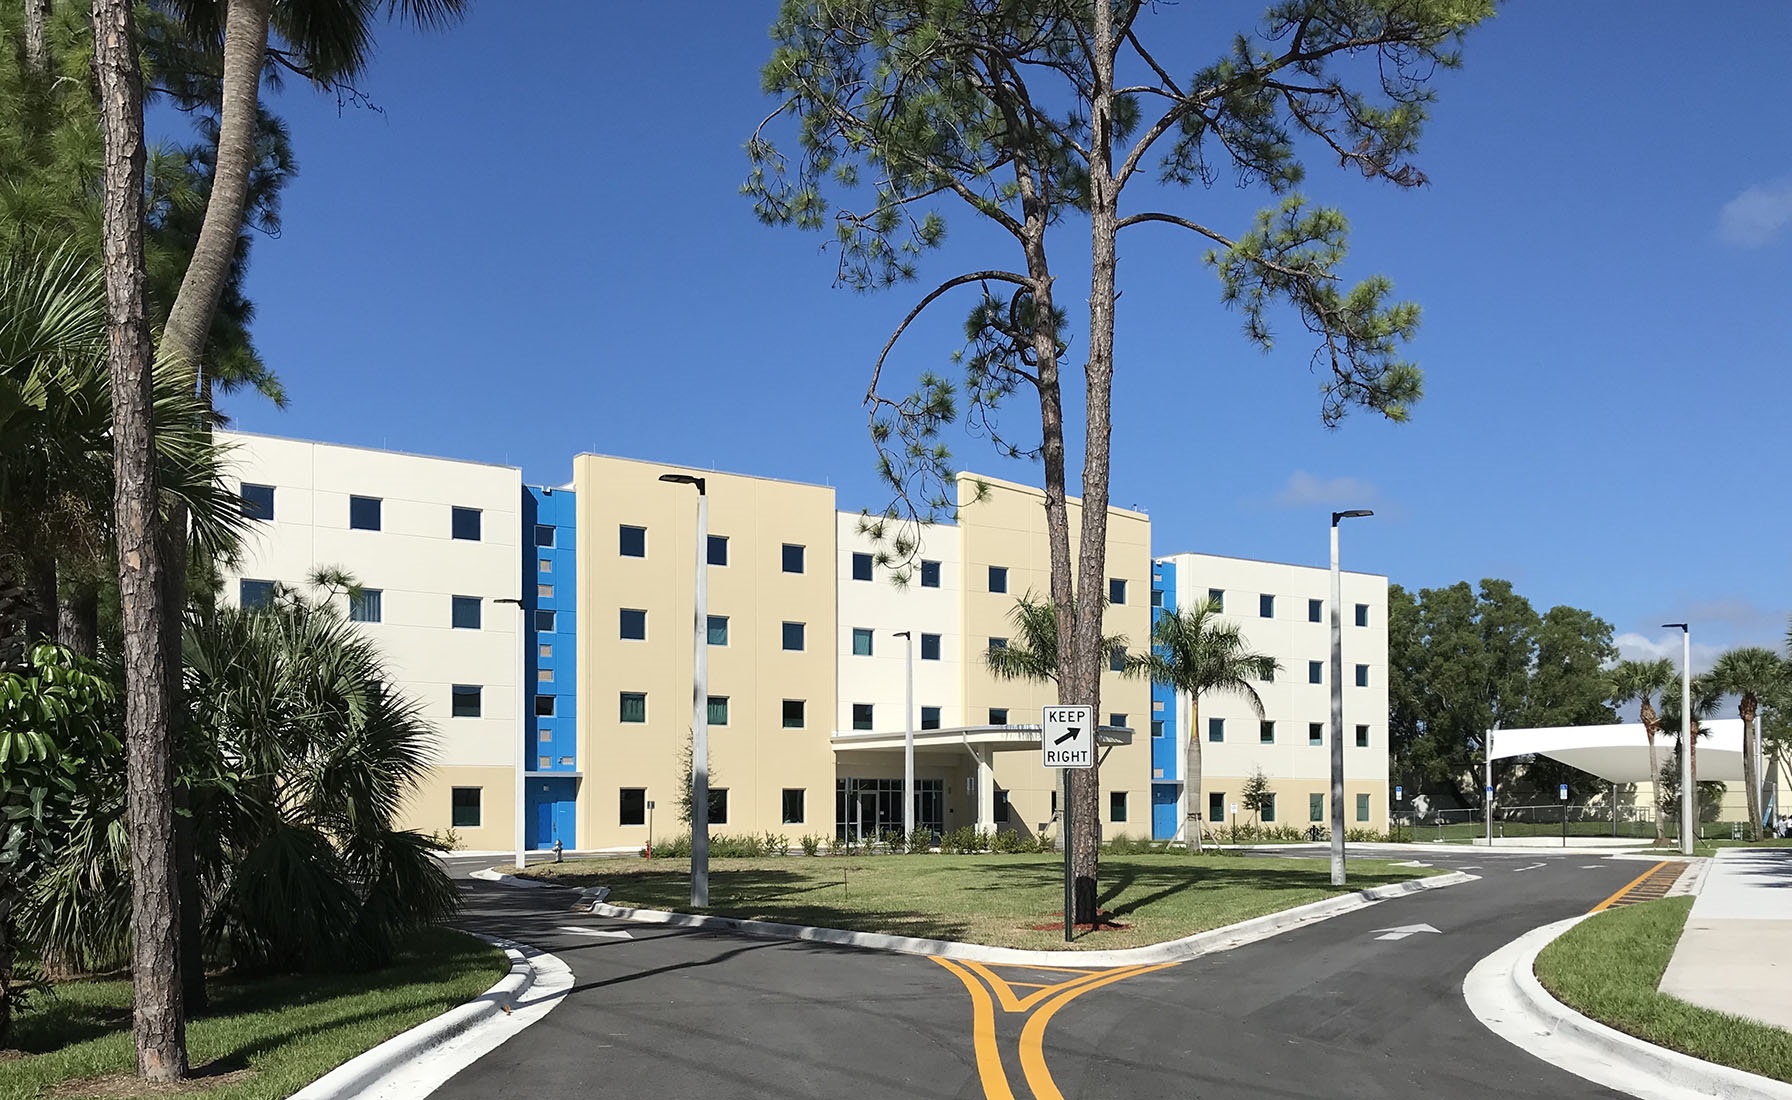 Keiser University’s Residence Hall Ribbon Cutting Ceremony Unveils Plan for 100 Million Campus